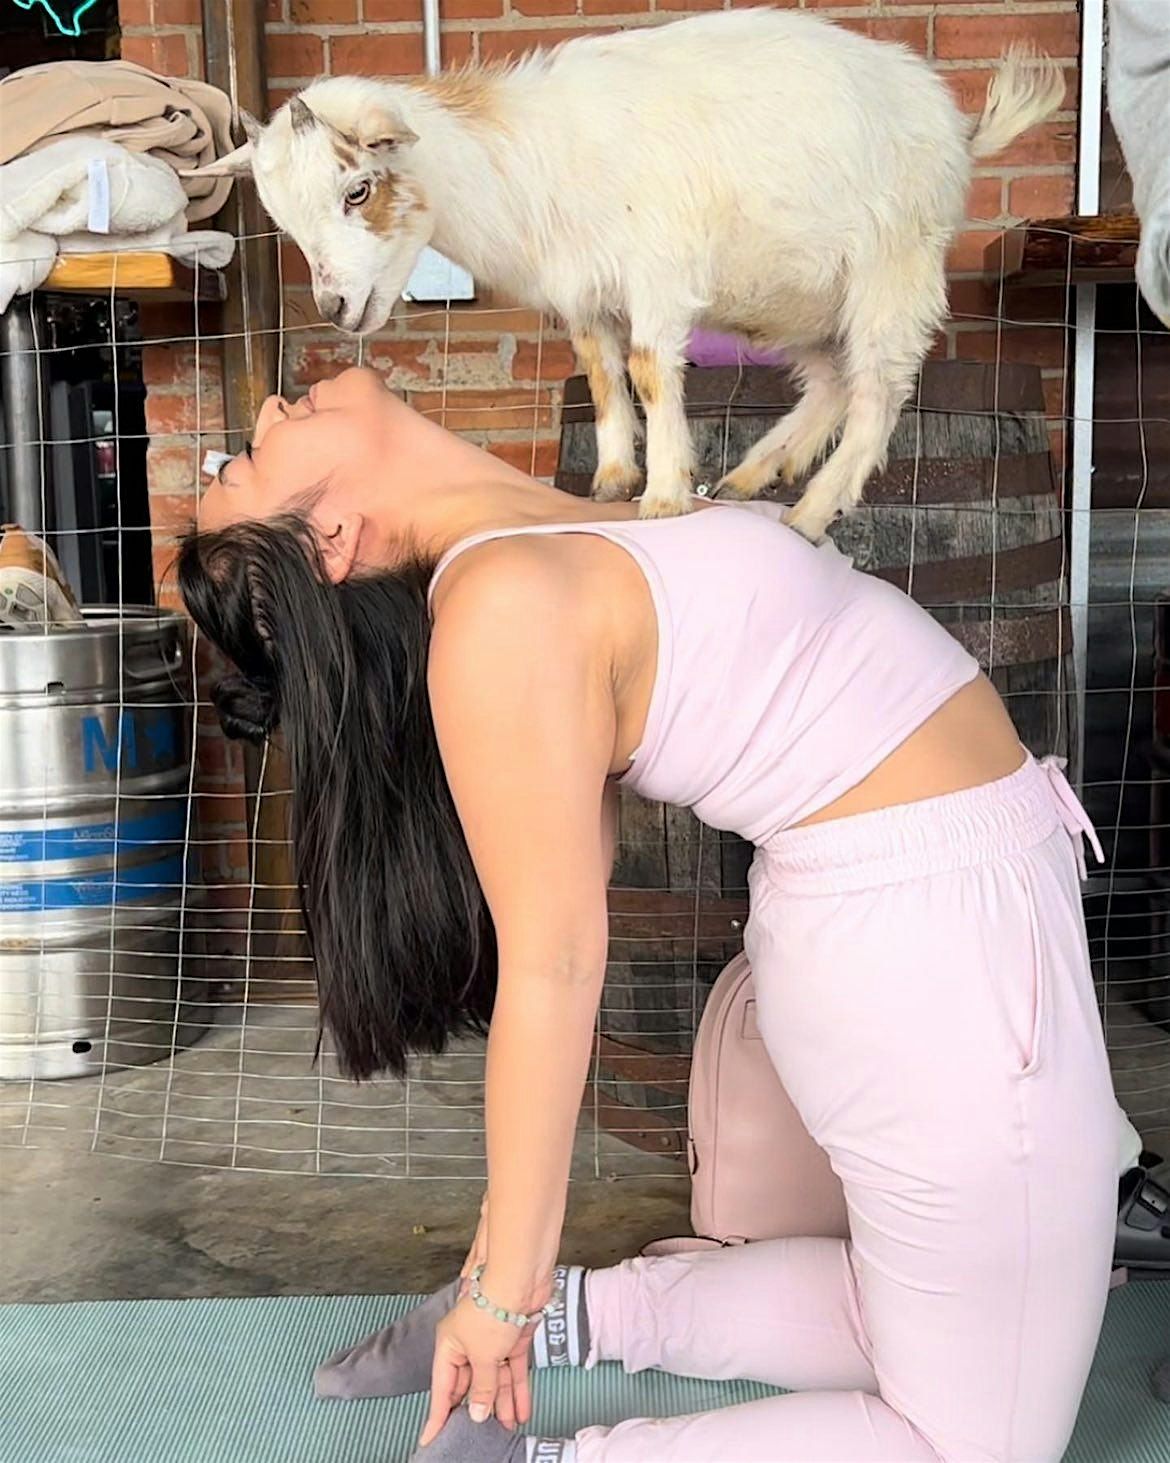 Goat Yoga Houston At Little Woodrows Midtown Sunday May 12th 10AM